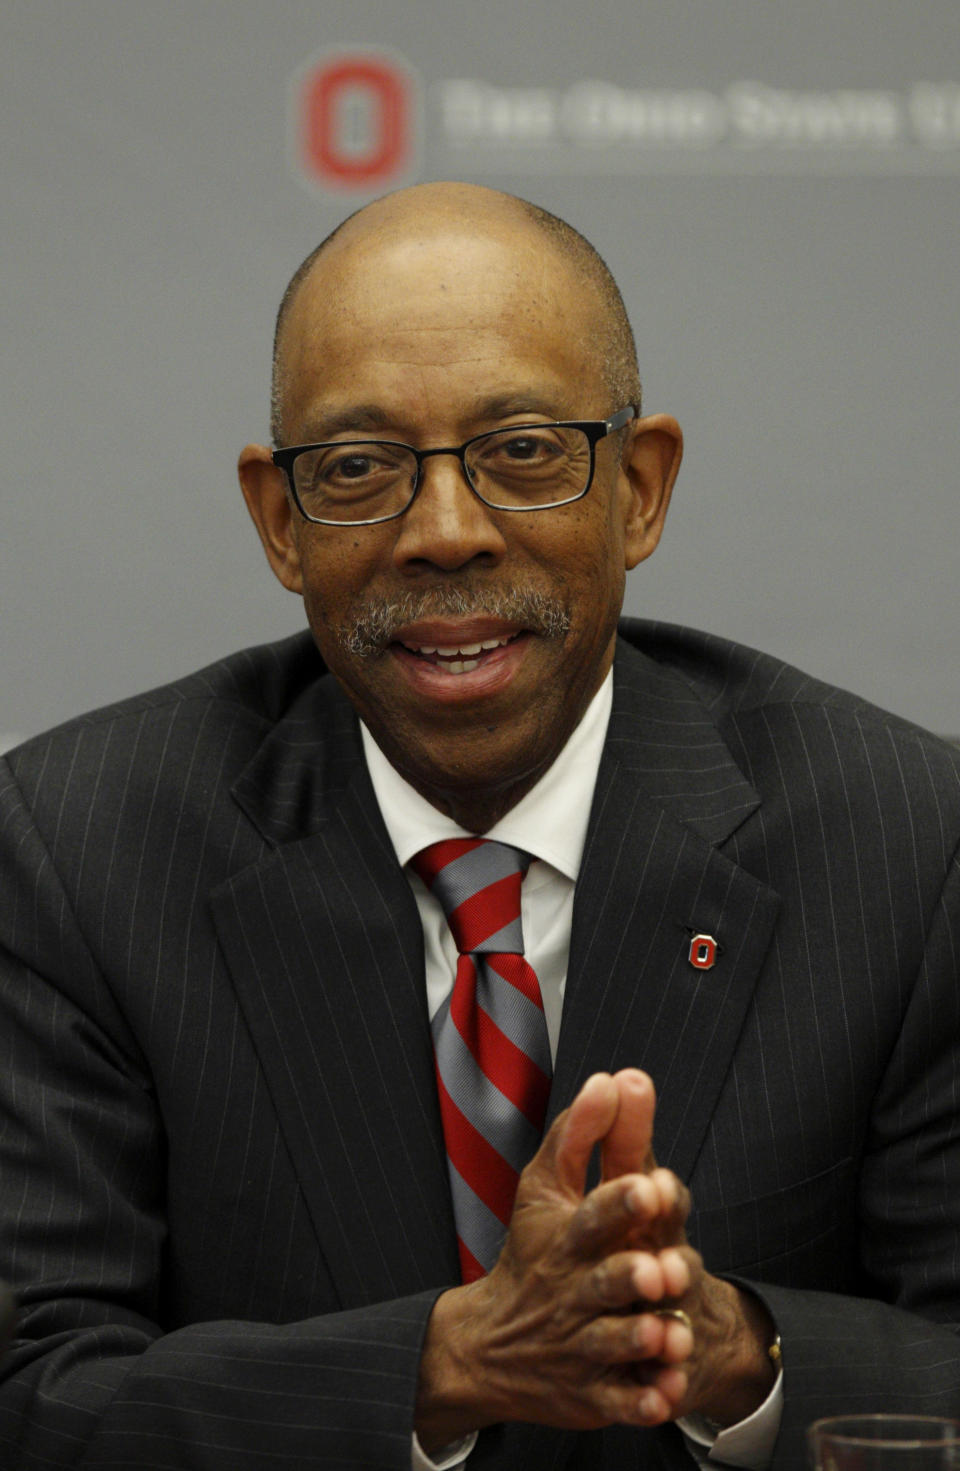 Dr. Michael Drake speaks during a press conference after being named the new president at Ohio State University following a university board meeting where he was voted in at the school Wednesday, Jan. 30, 2014. (AP Photo/Paul Vernon)